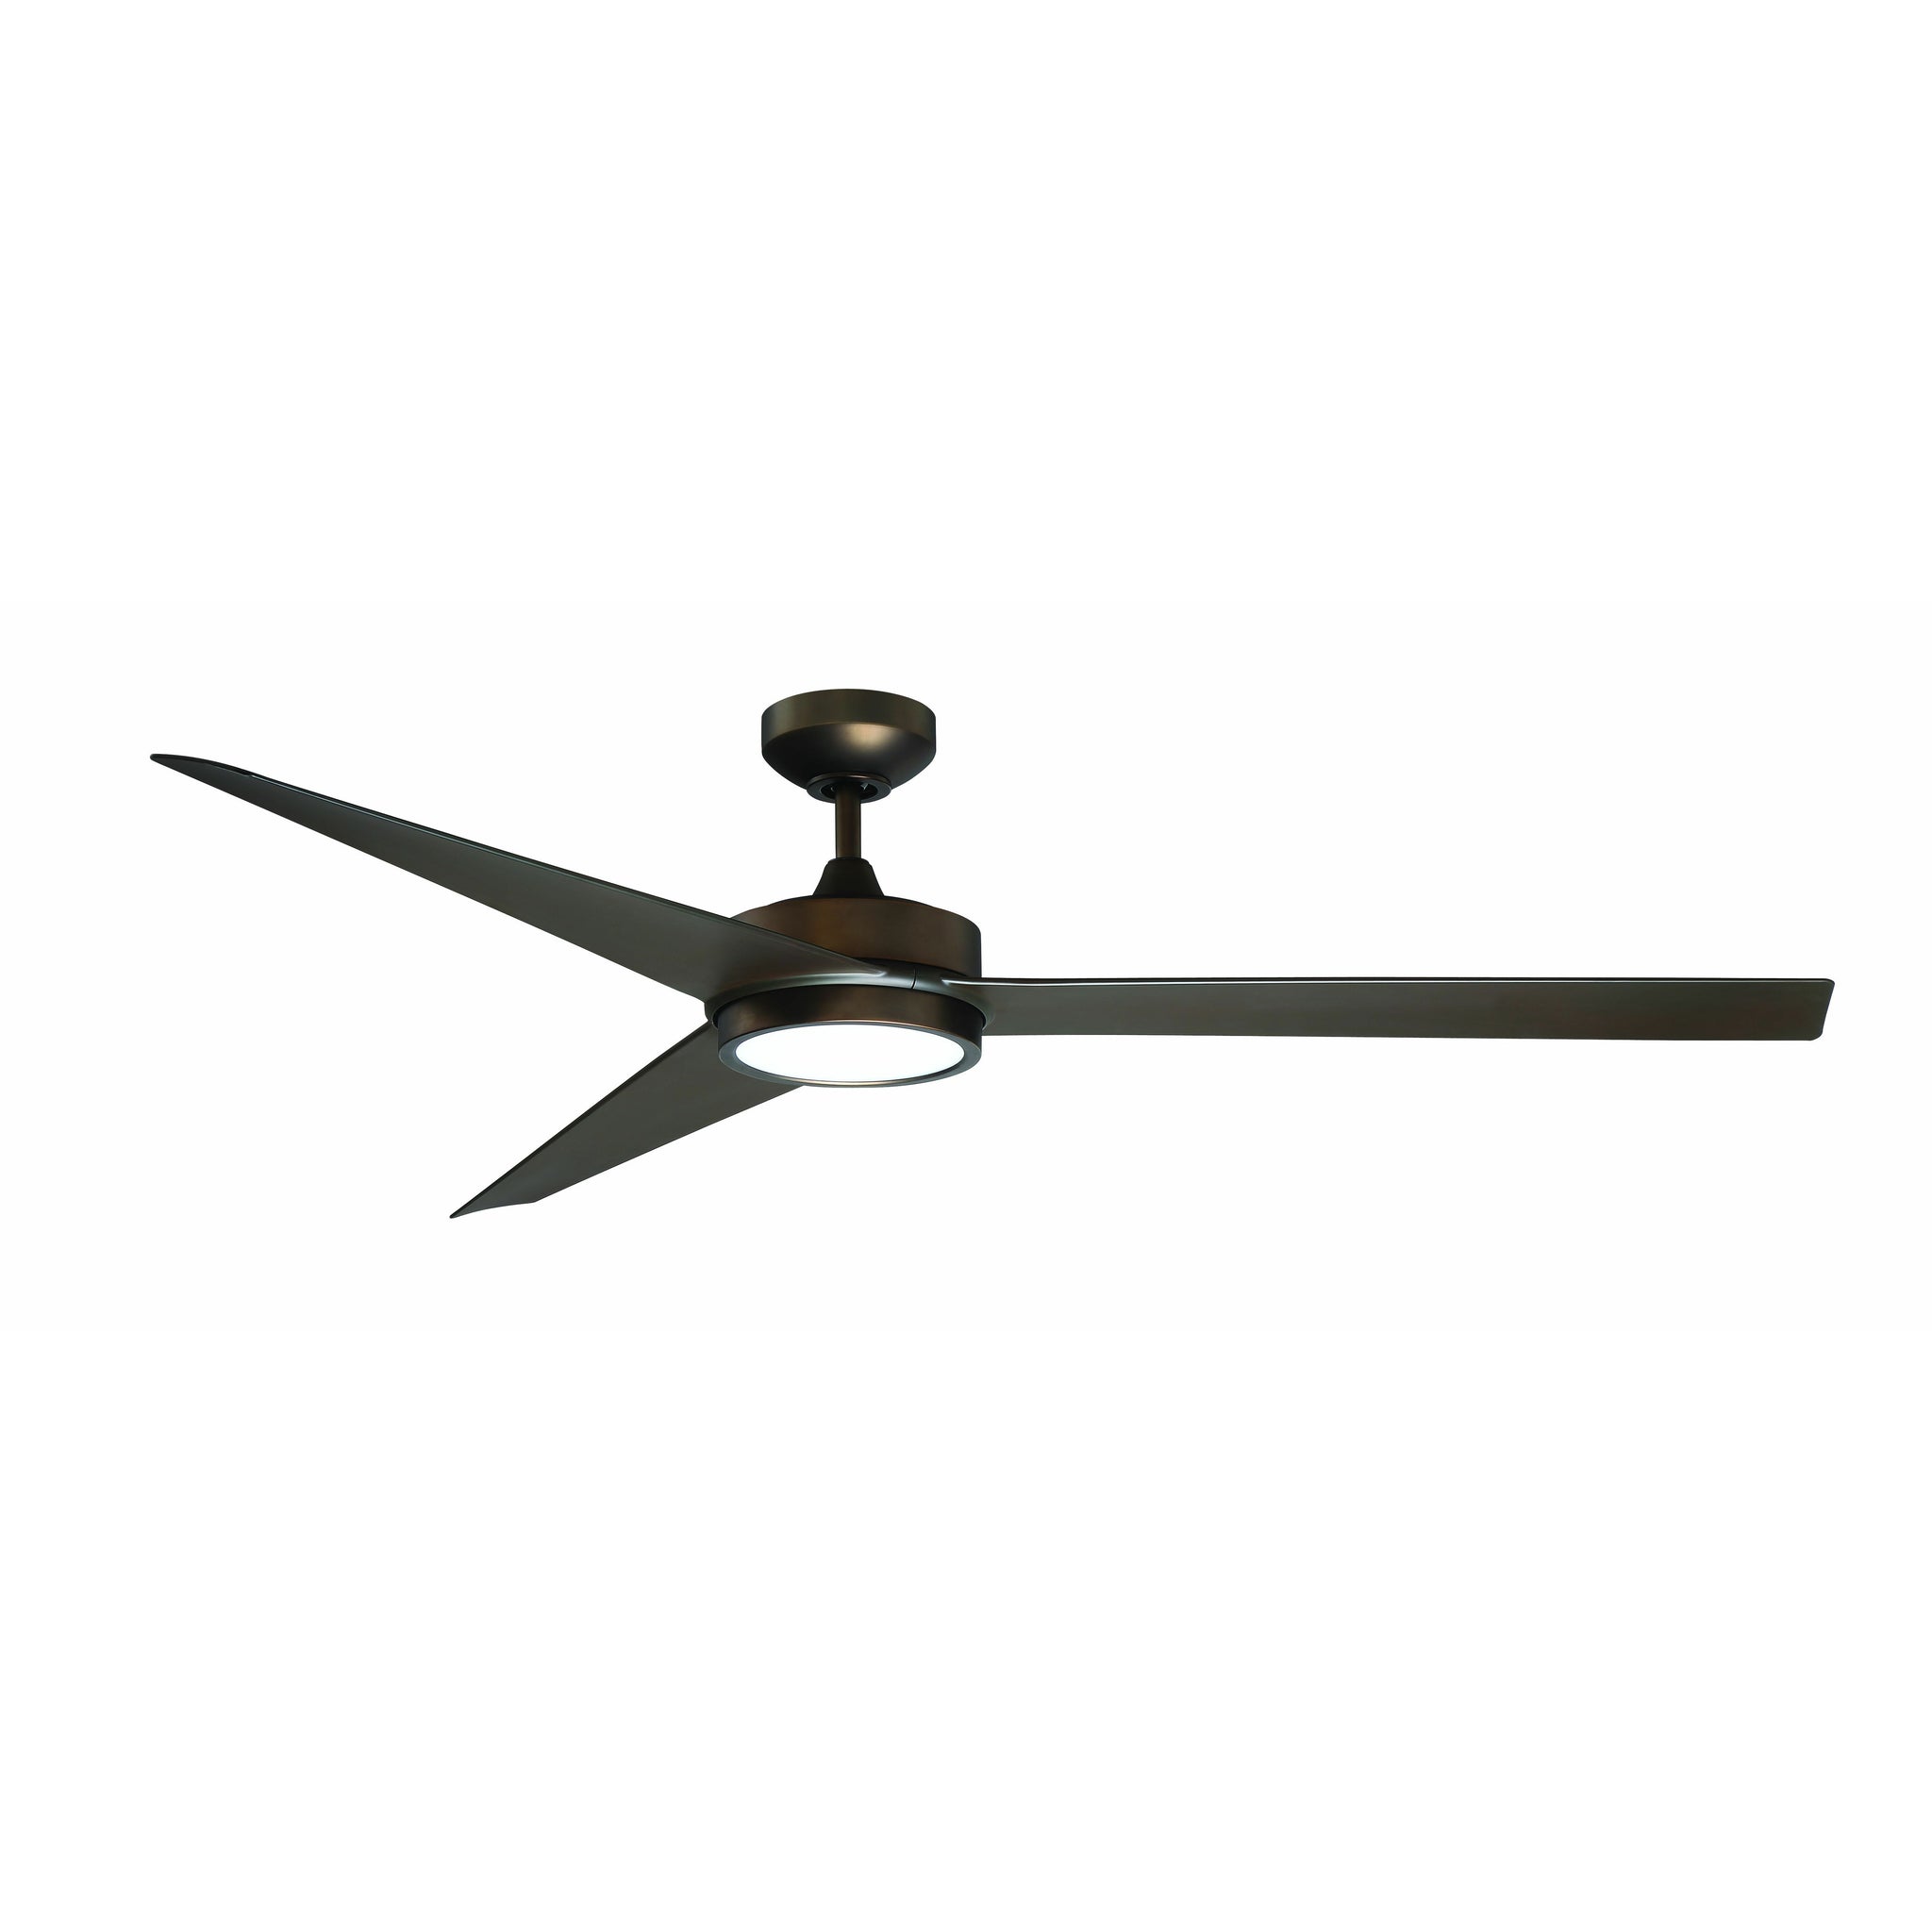 Triceptor Ceiling Fan Architectural Bronze with matching blades